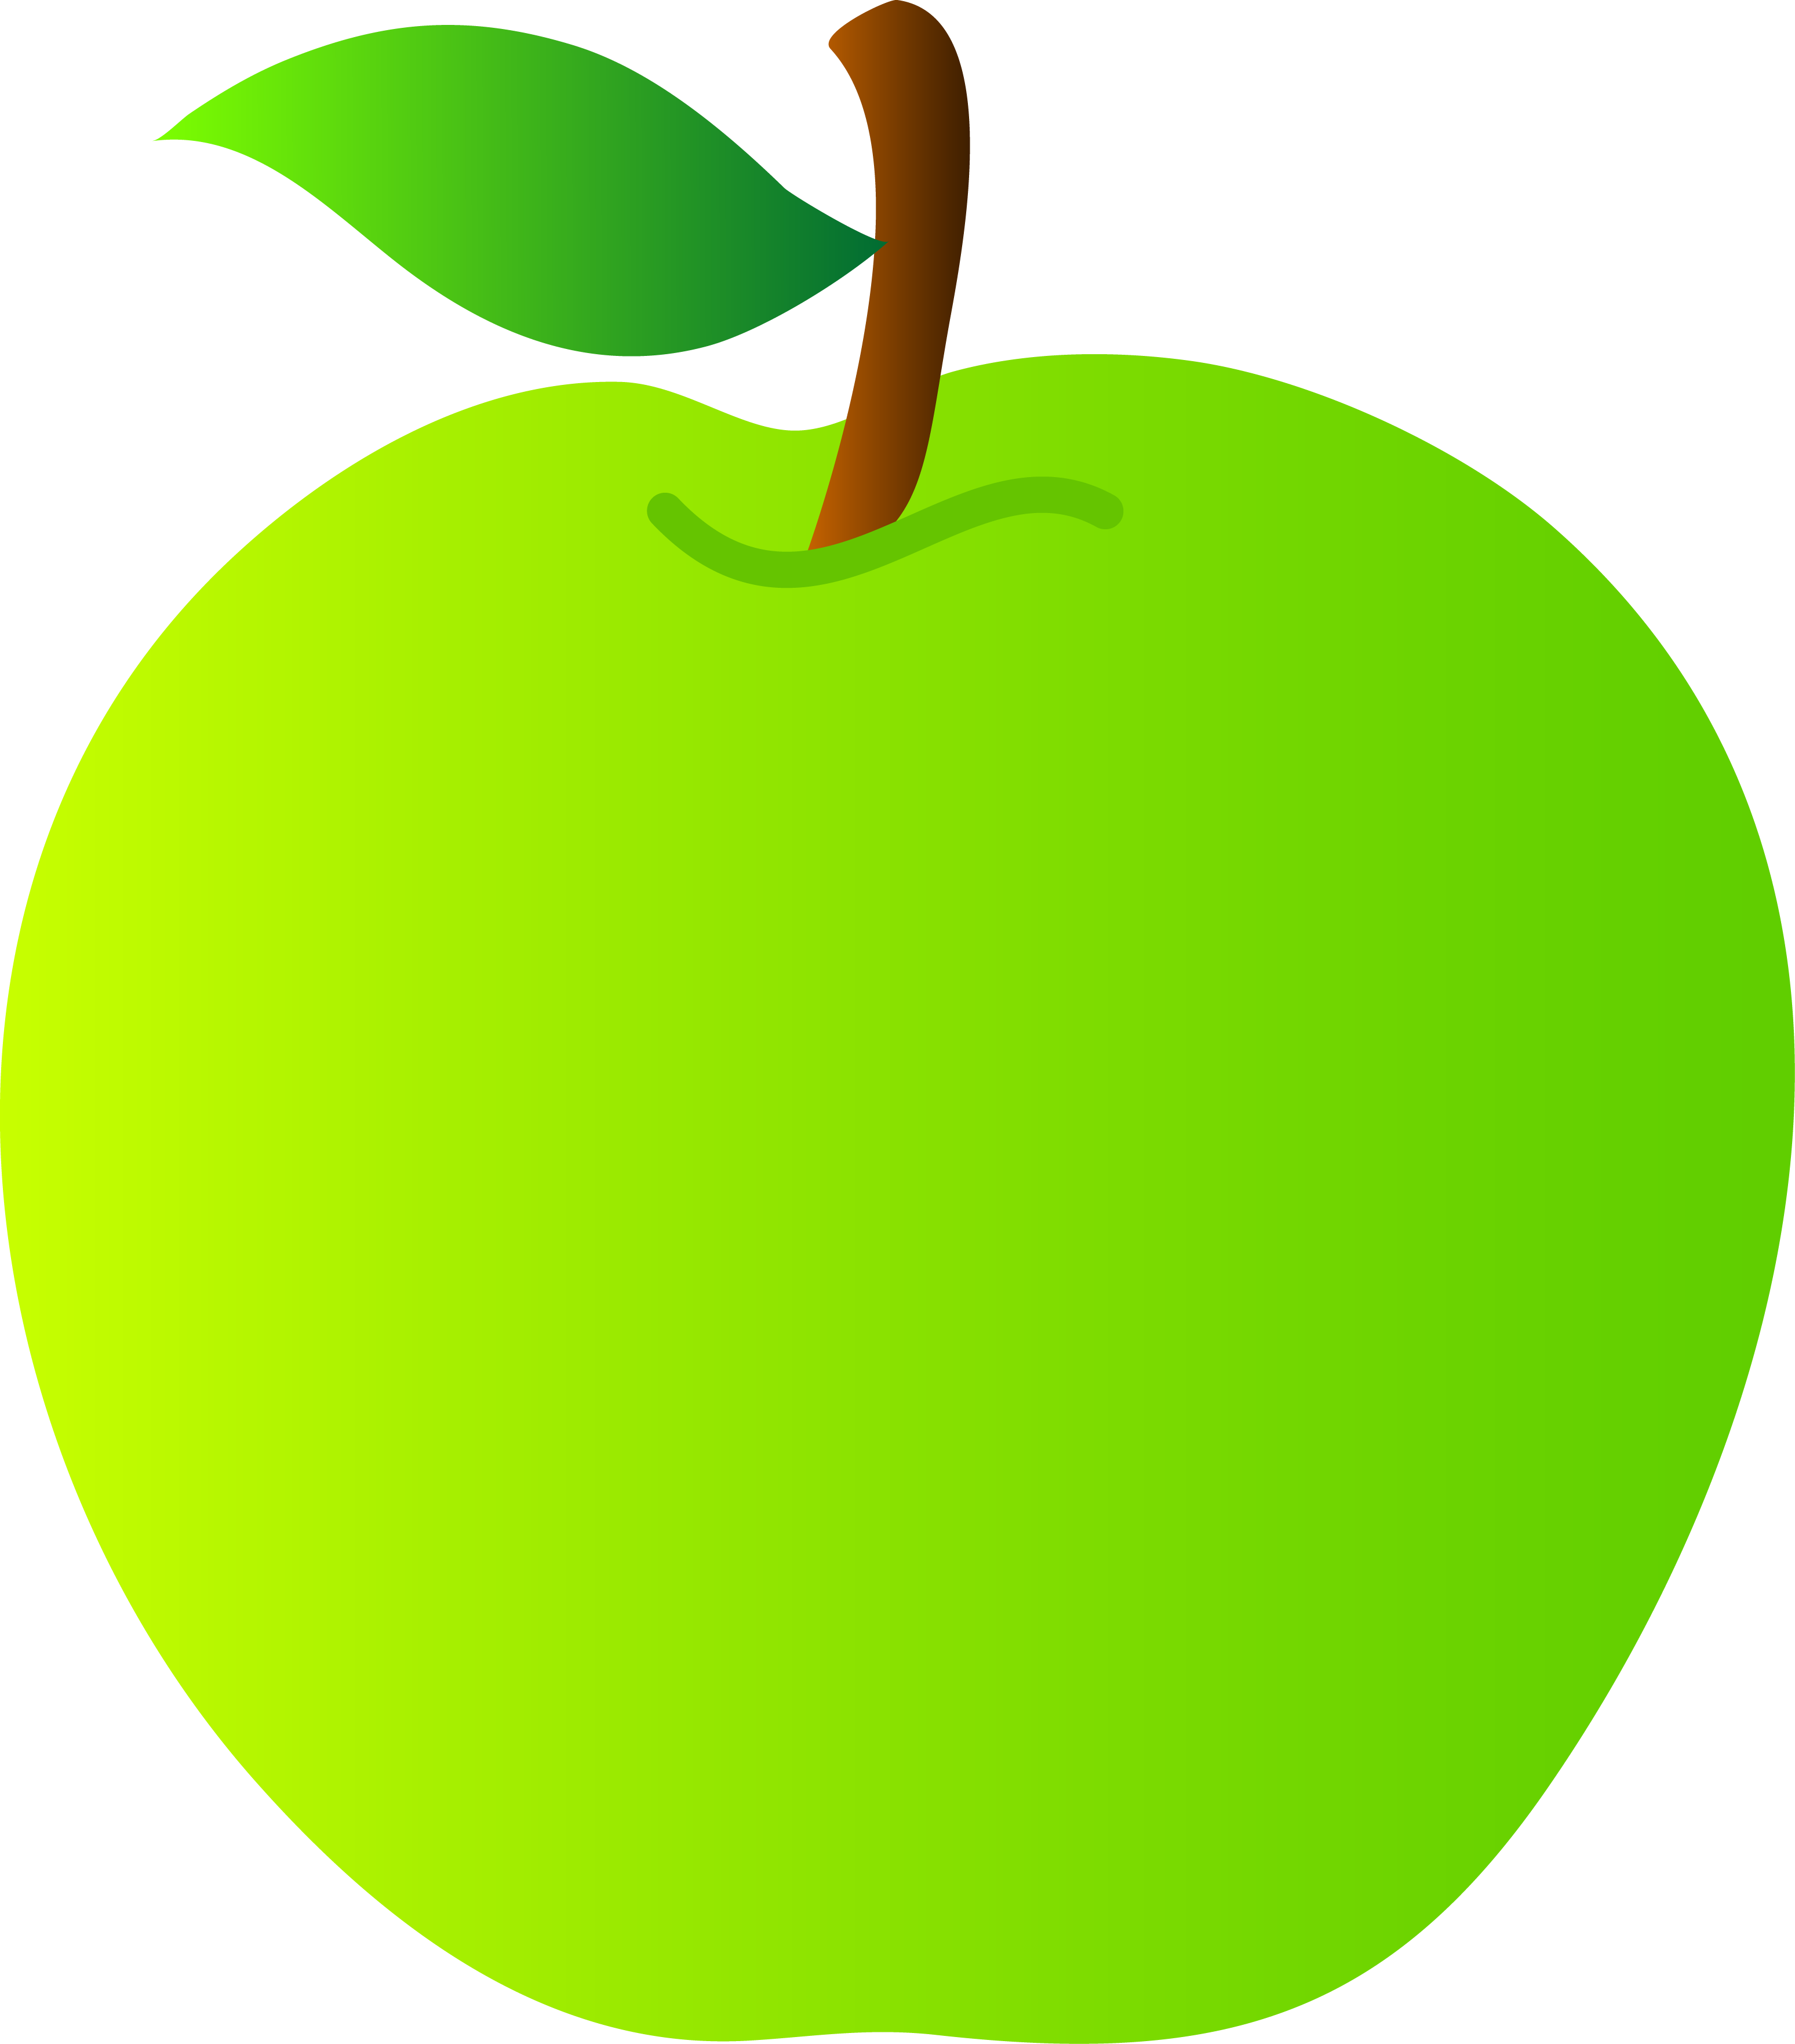 Granny Smith Apple Drawing - Green Apples Drawing Png, Transparent Png ,  Transparent Png Image - PNGitem